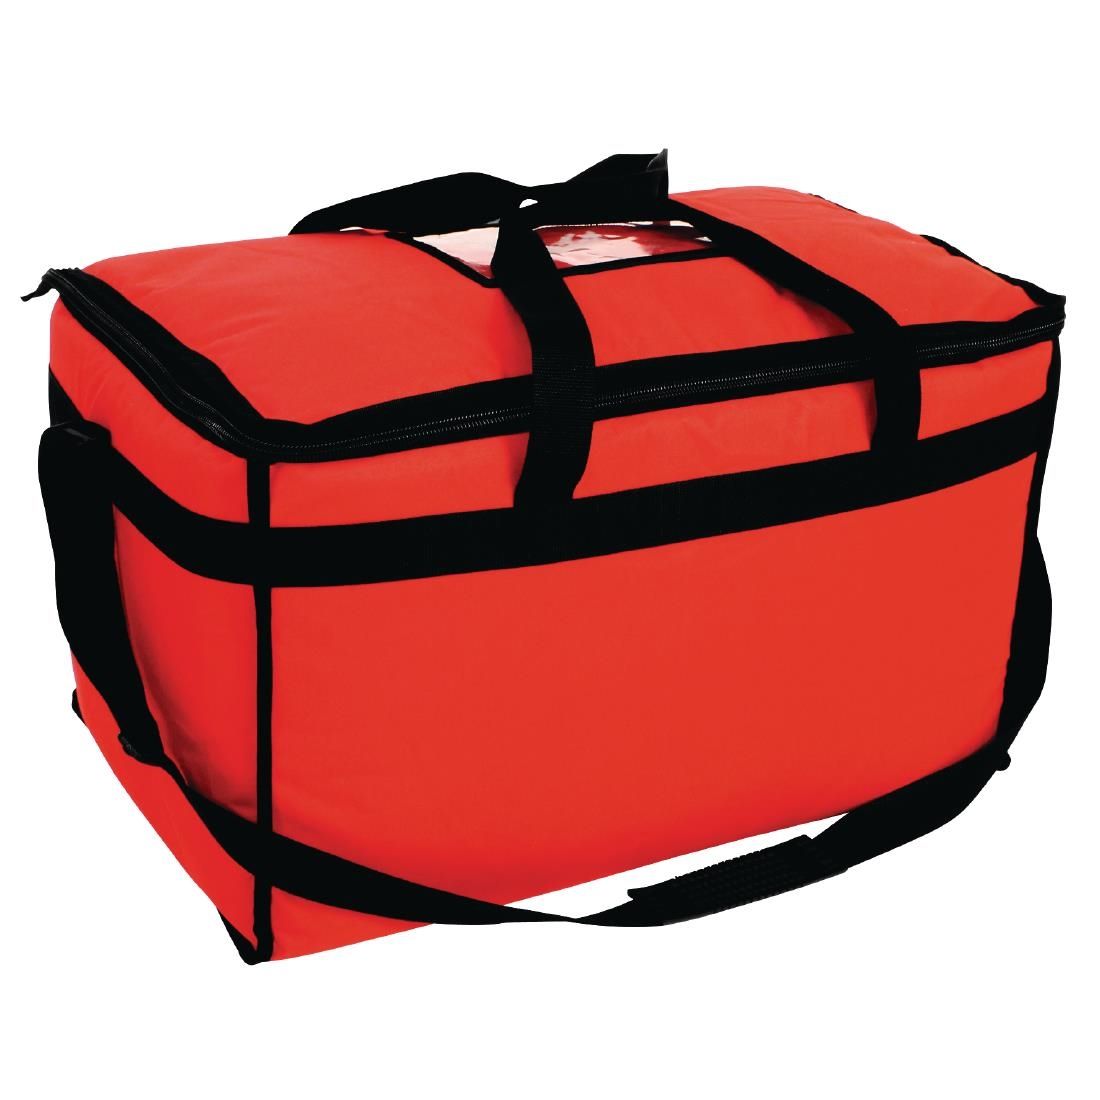 GG141 Vogue Large Polyester Insulated Food Delivery Bag JD Catering Equipment Solutions Ltd